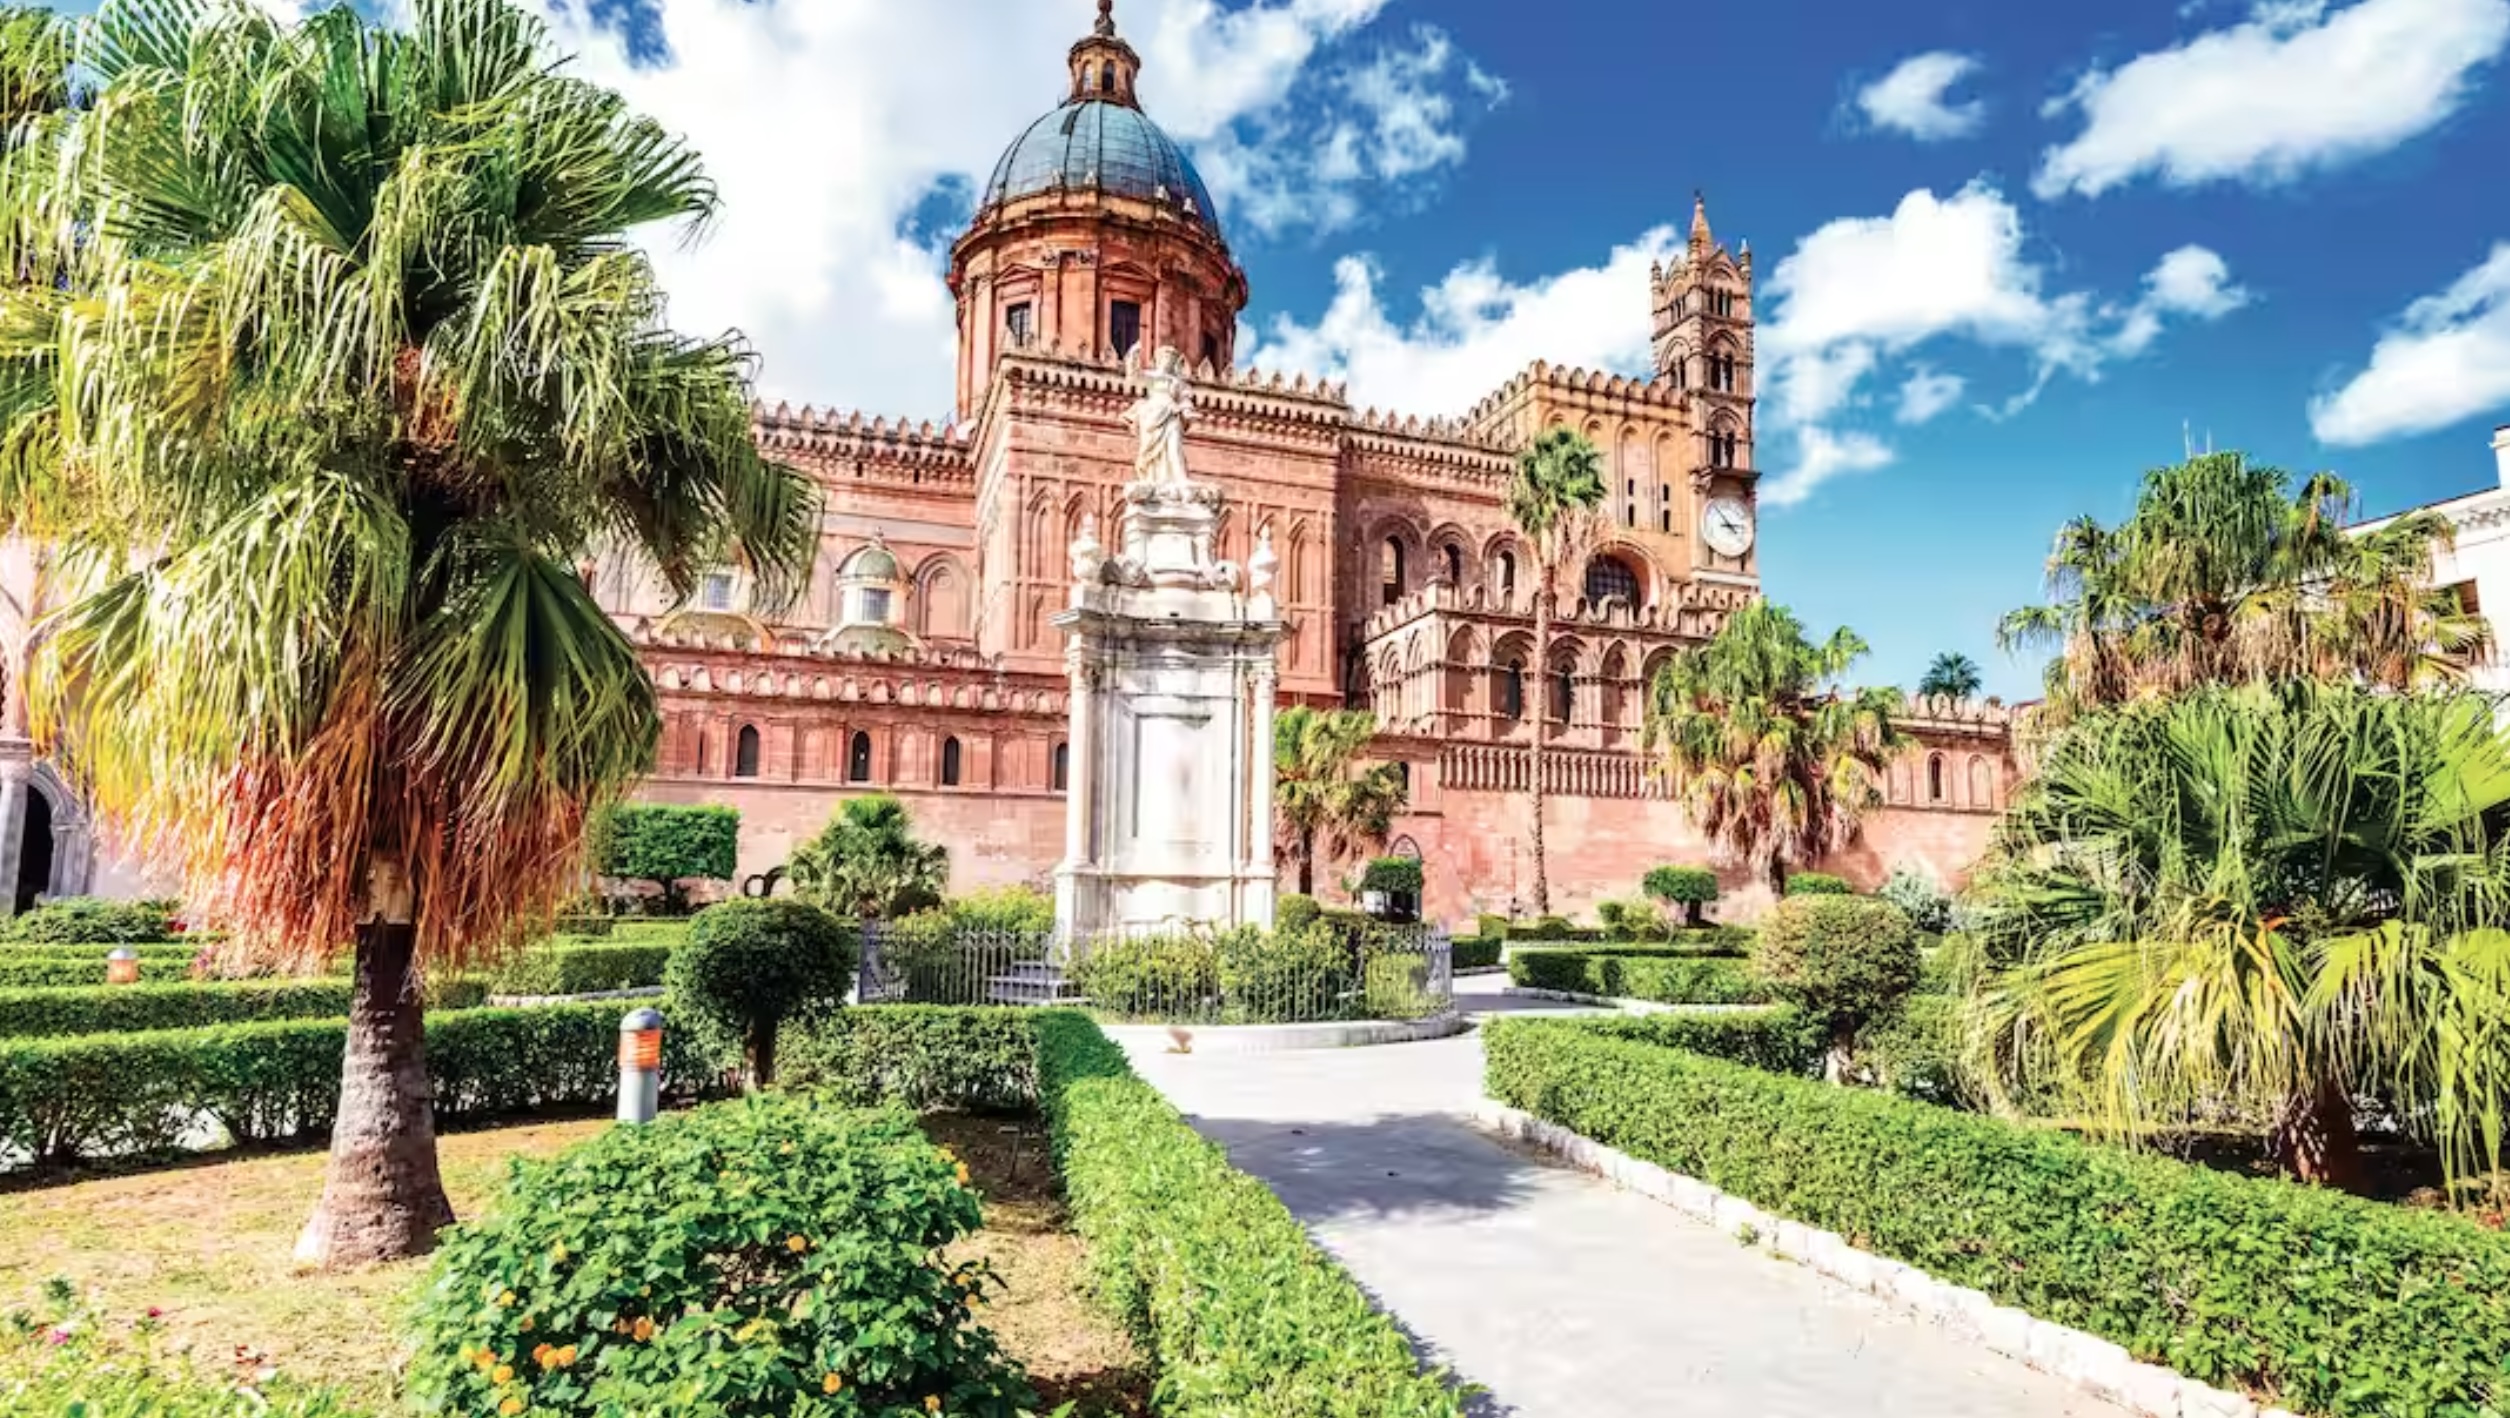 Palermo Cathedral & gardens, Sicily